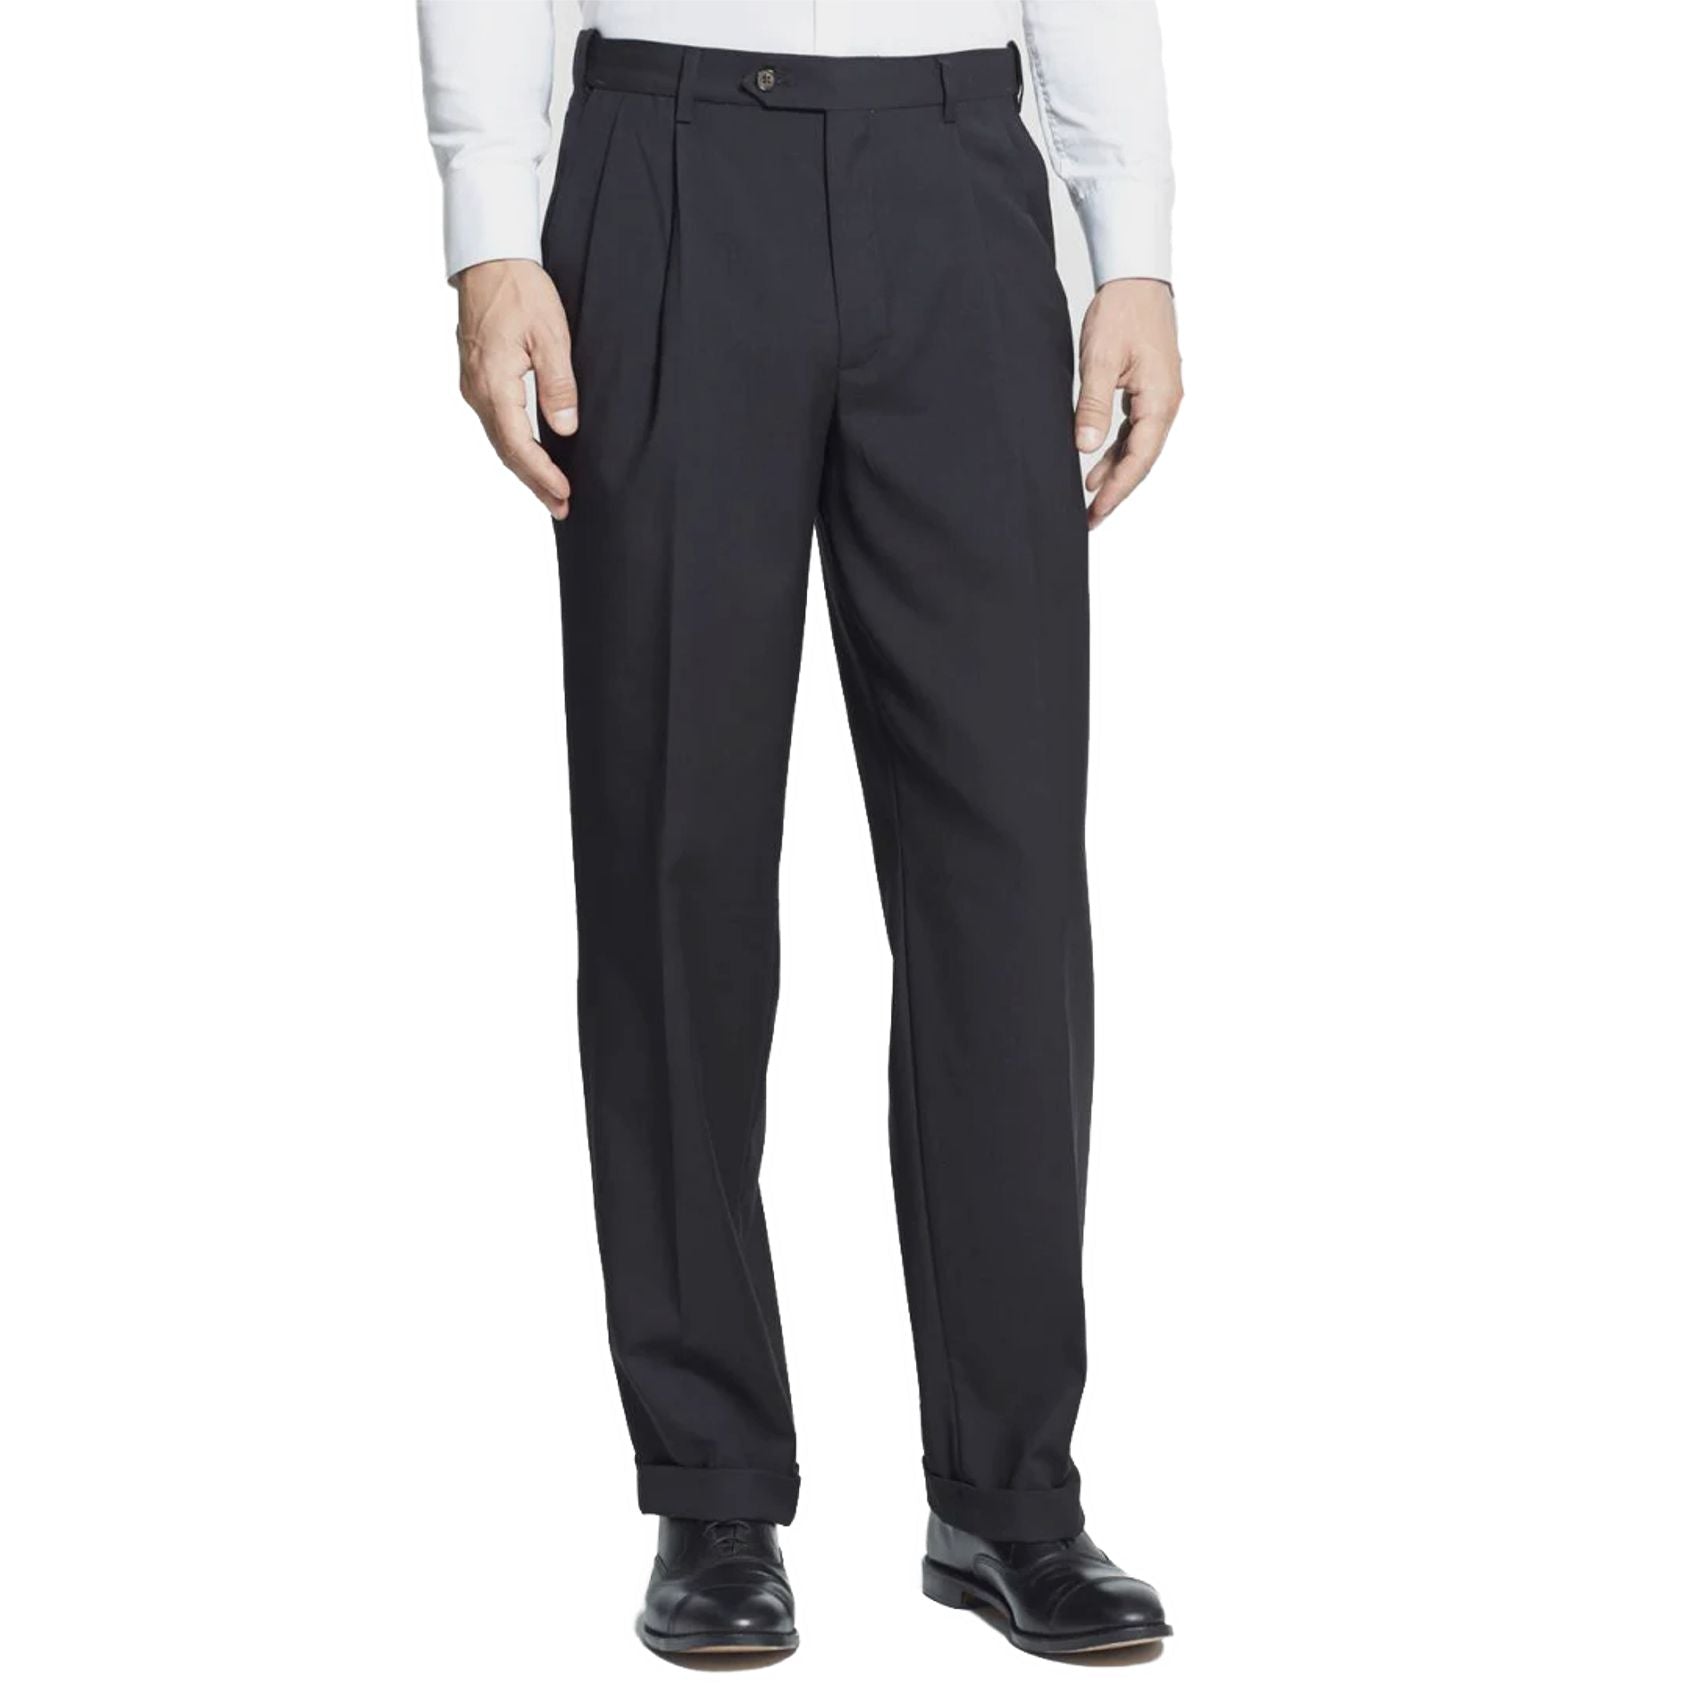 Polyester/Wool Tropical Washable Trouser in Black (Self Sizer Double Reverse Pleat - Regular & Long Rise) by Berle